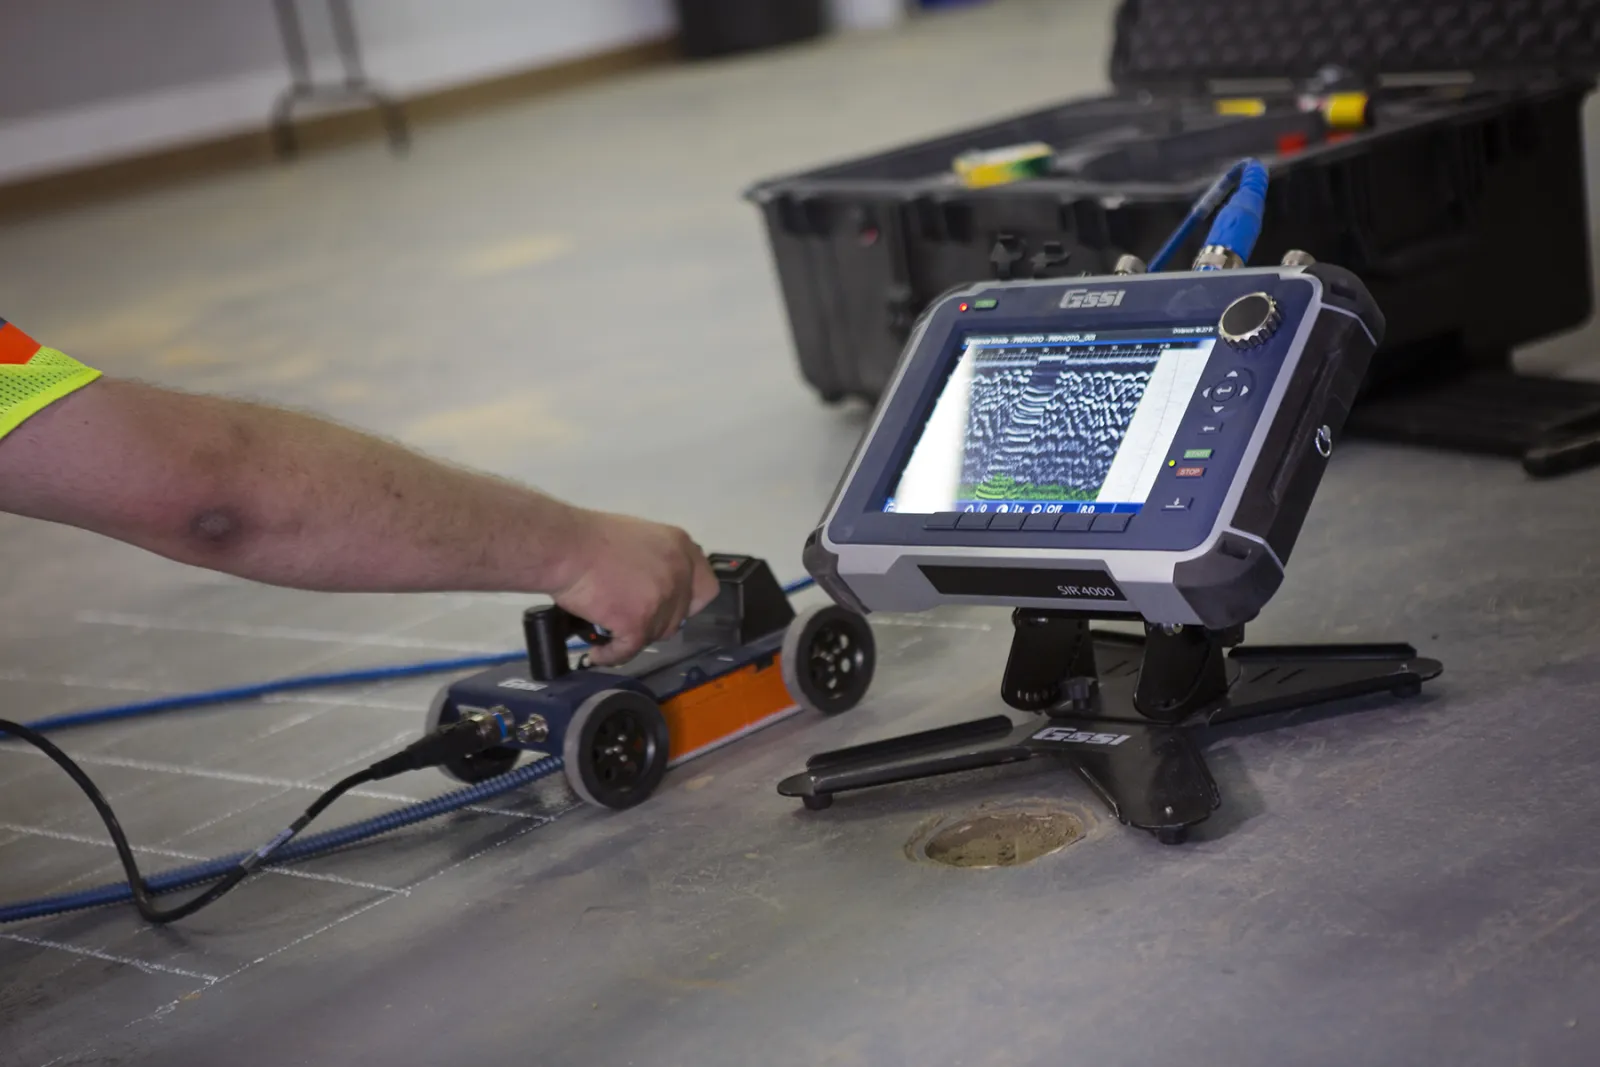 Concrete scanning services to detect and protect existing utilities and structural supports